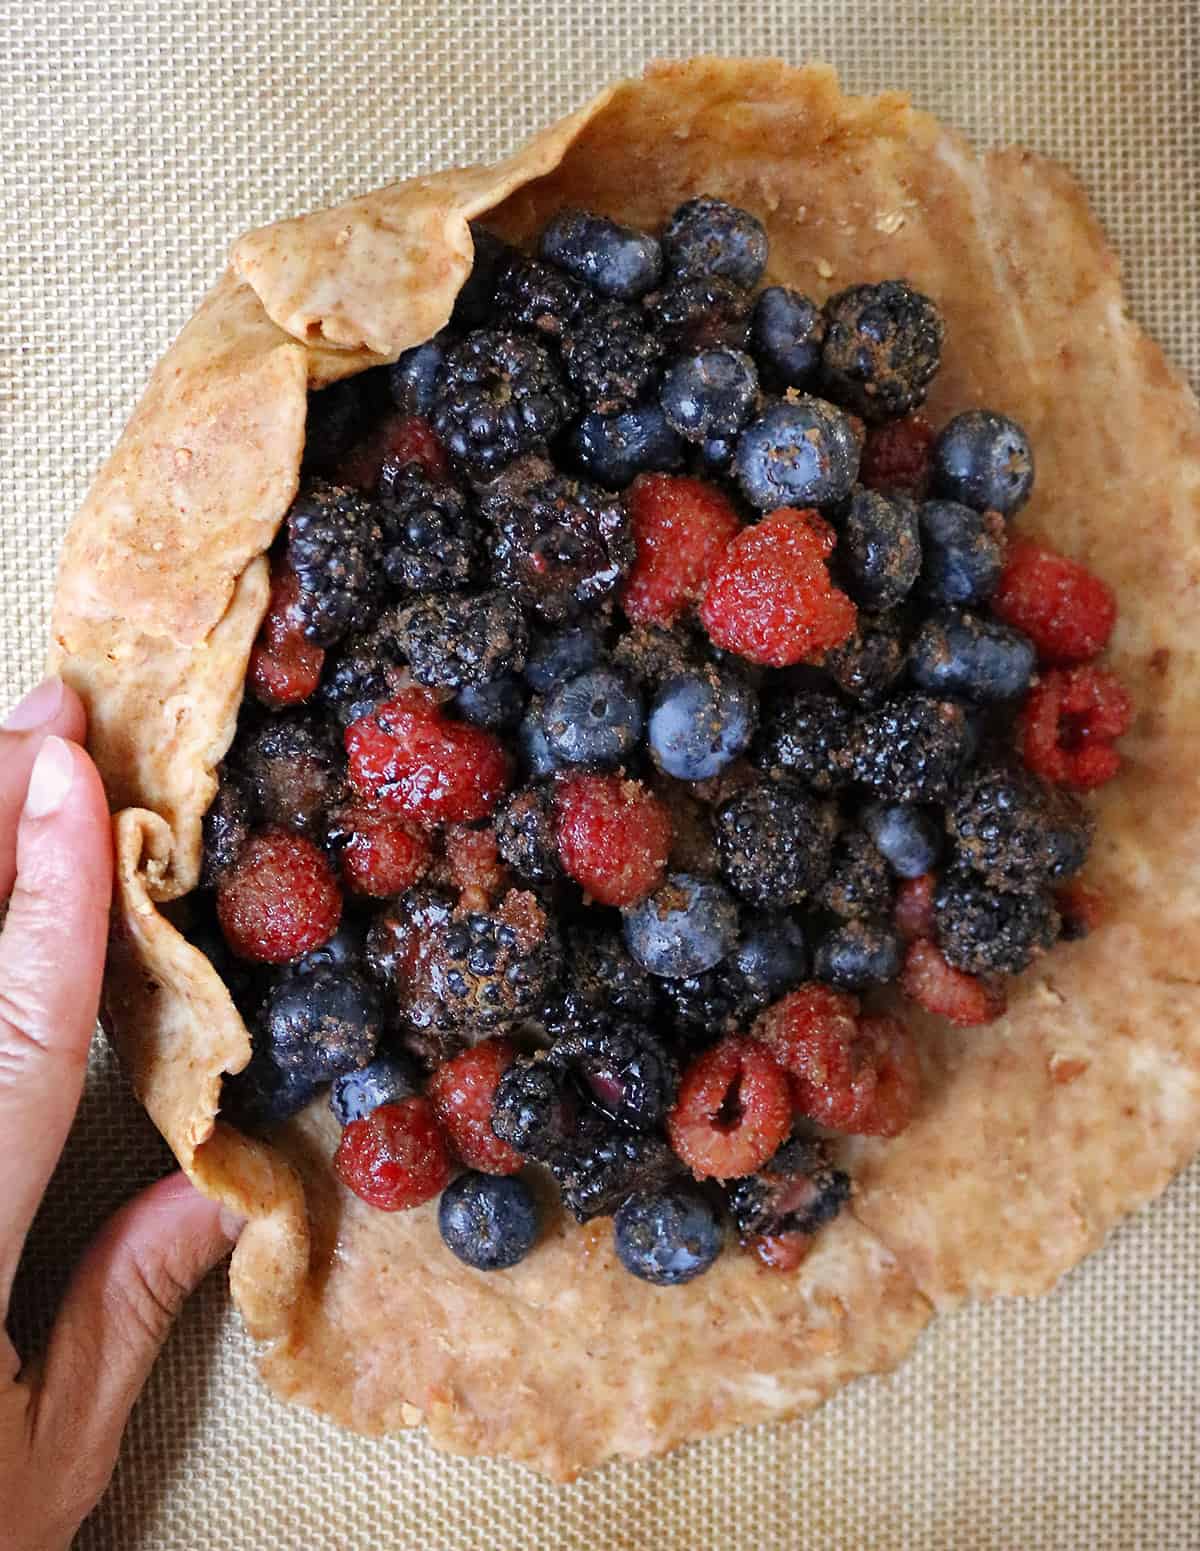 Getting ready to bake Berry Galette